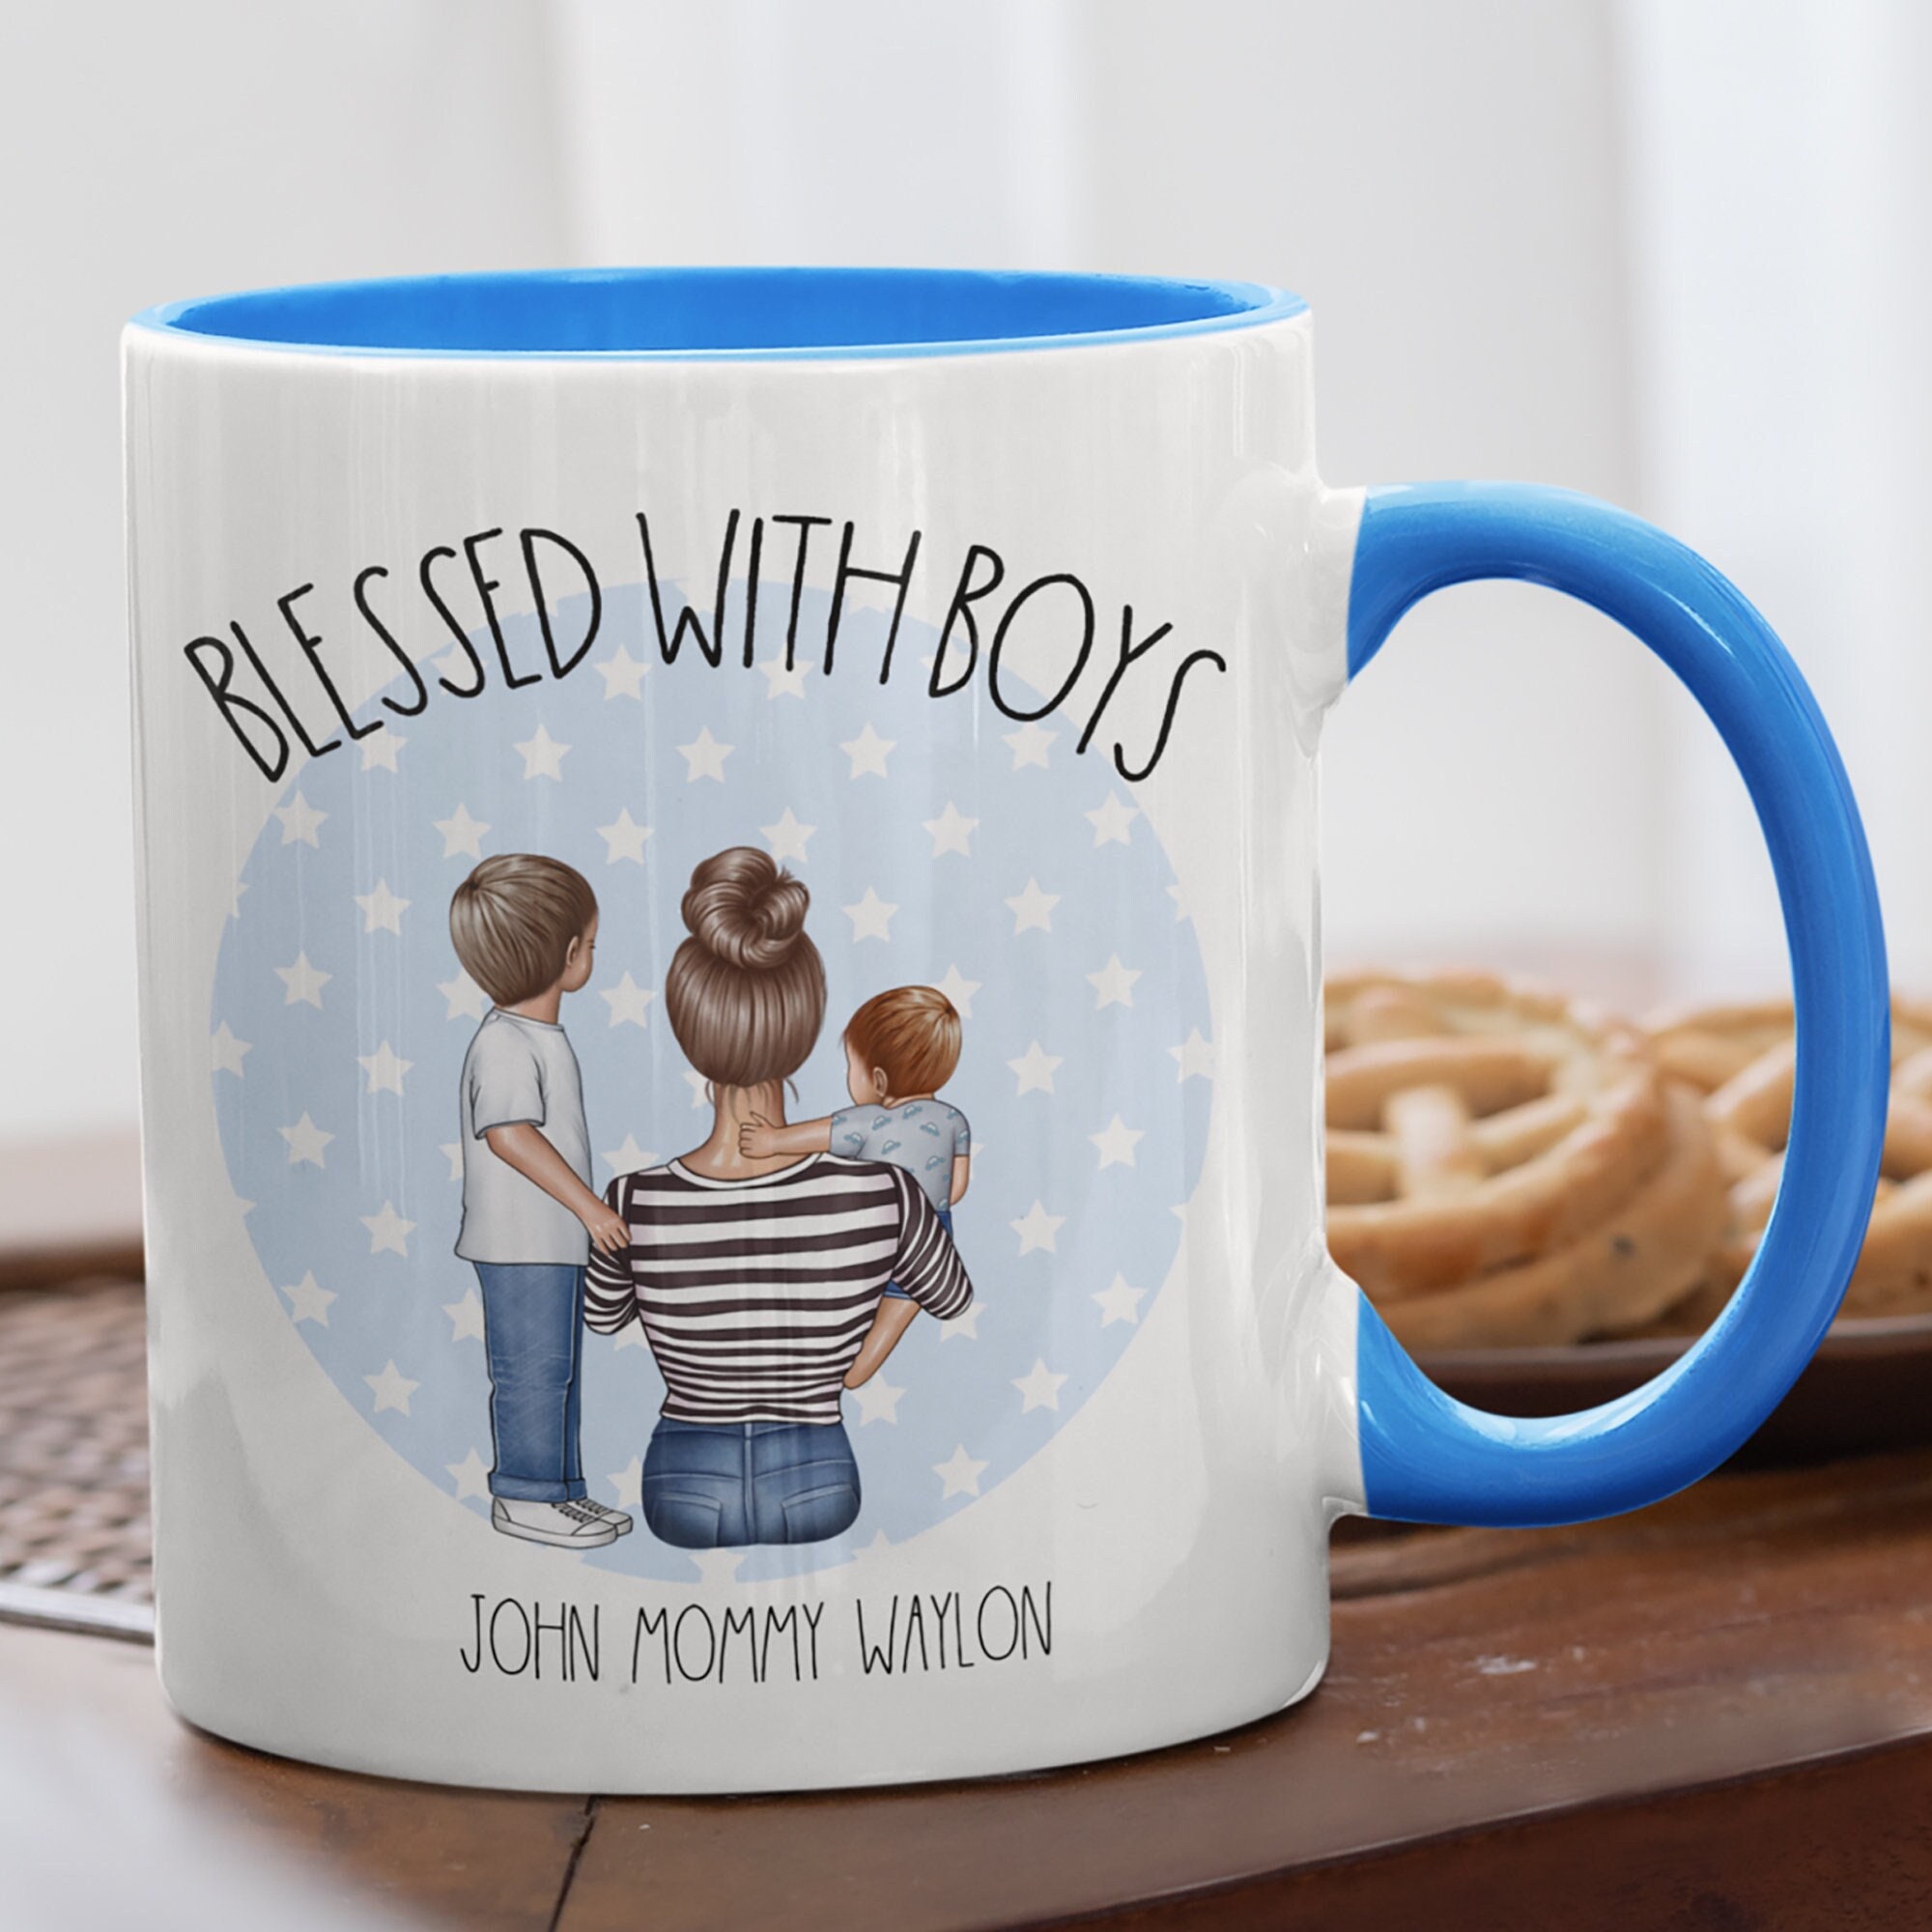 Blessed Mama mug with Bible Quote, Mother's Day Gift, Religious mug –  LennyMud